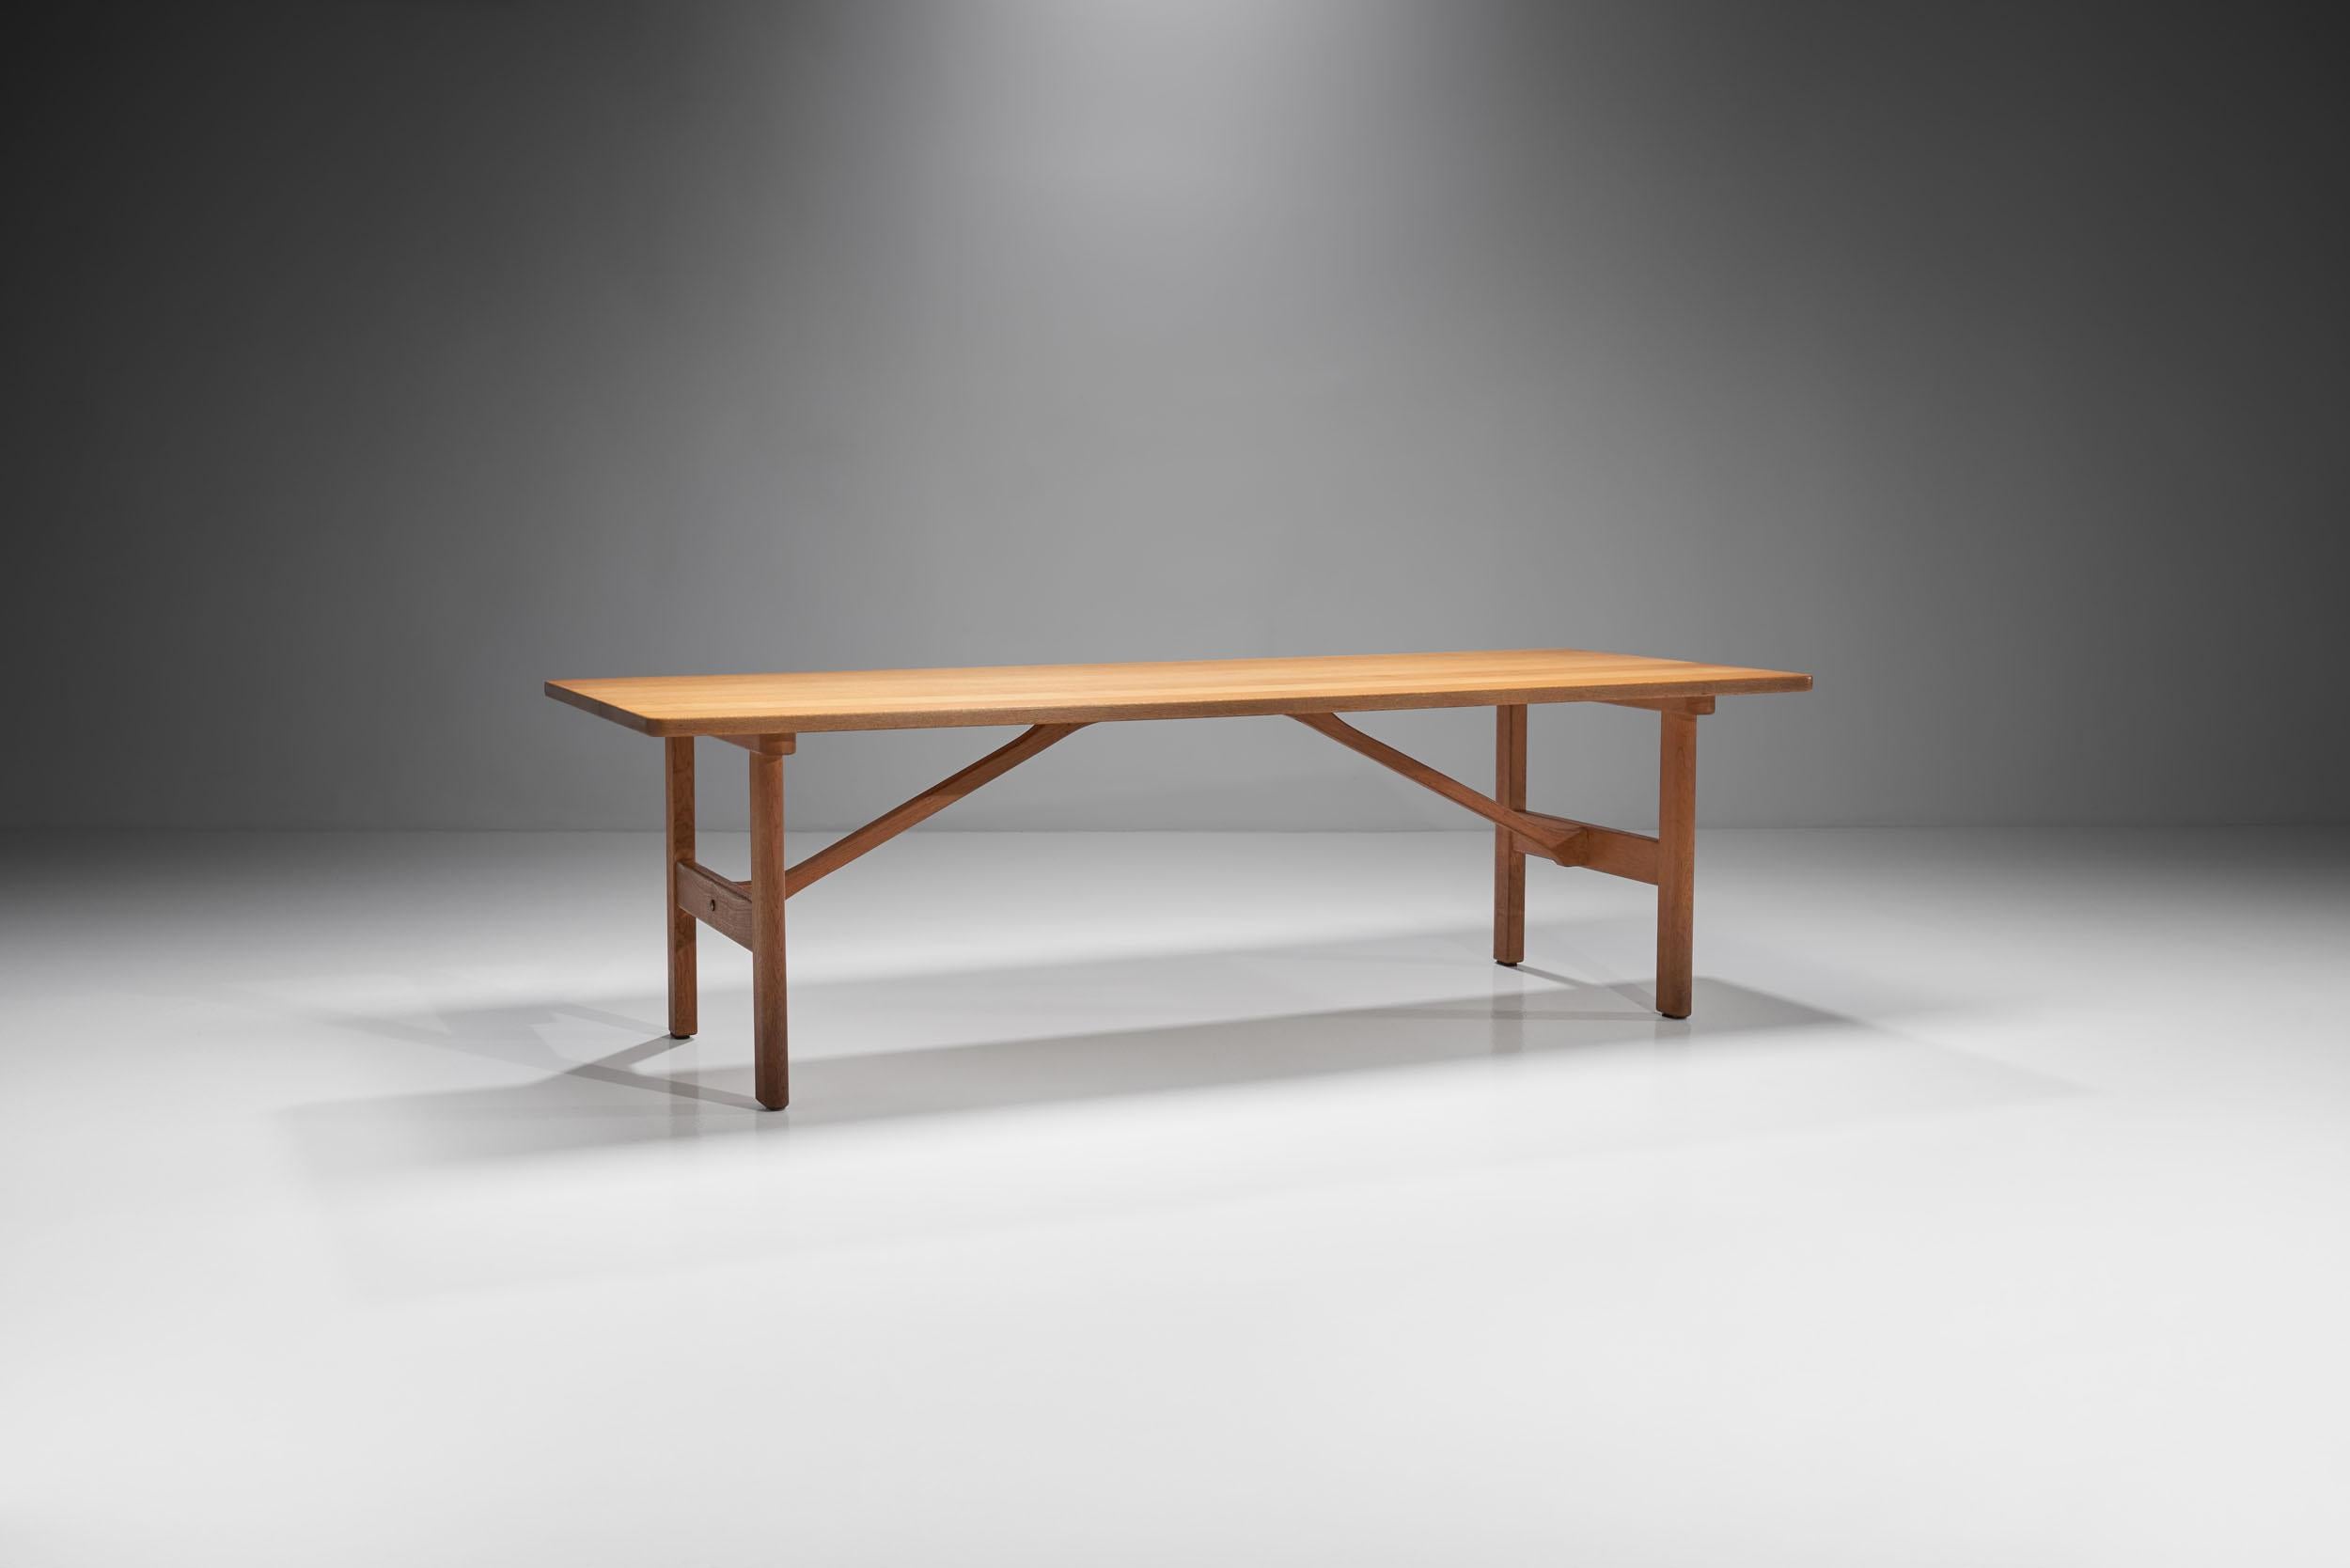 This solid oak coffee table by Danish master, Børge Mogensen, has an outstanding balance with a Classic, timeless design. This “Model 5268” mirrors Mogensen’s ideal, which was to create furniture with a restrained aesthetic that serve people.

With